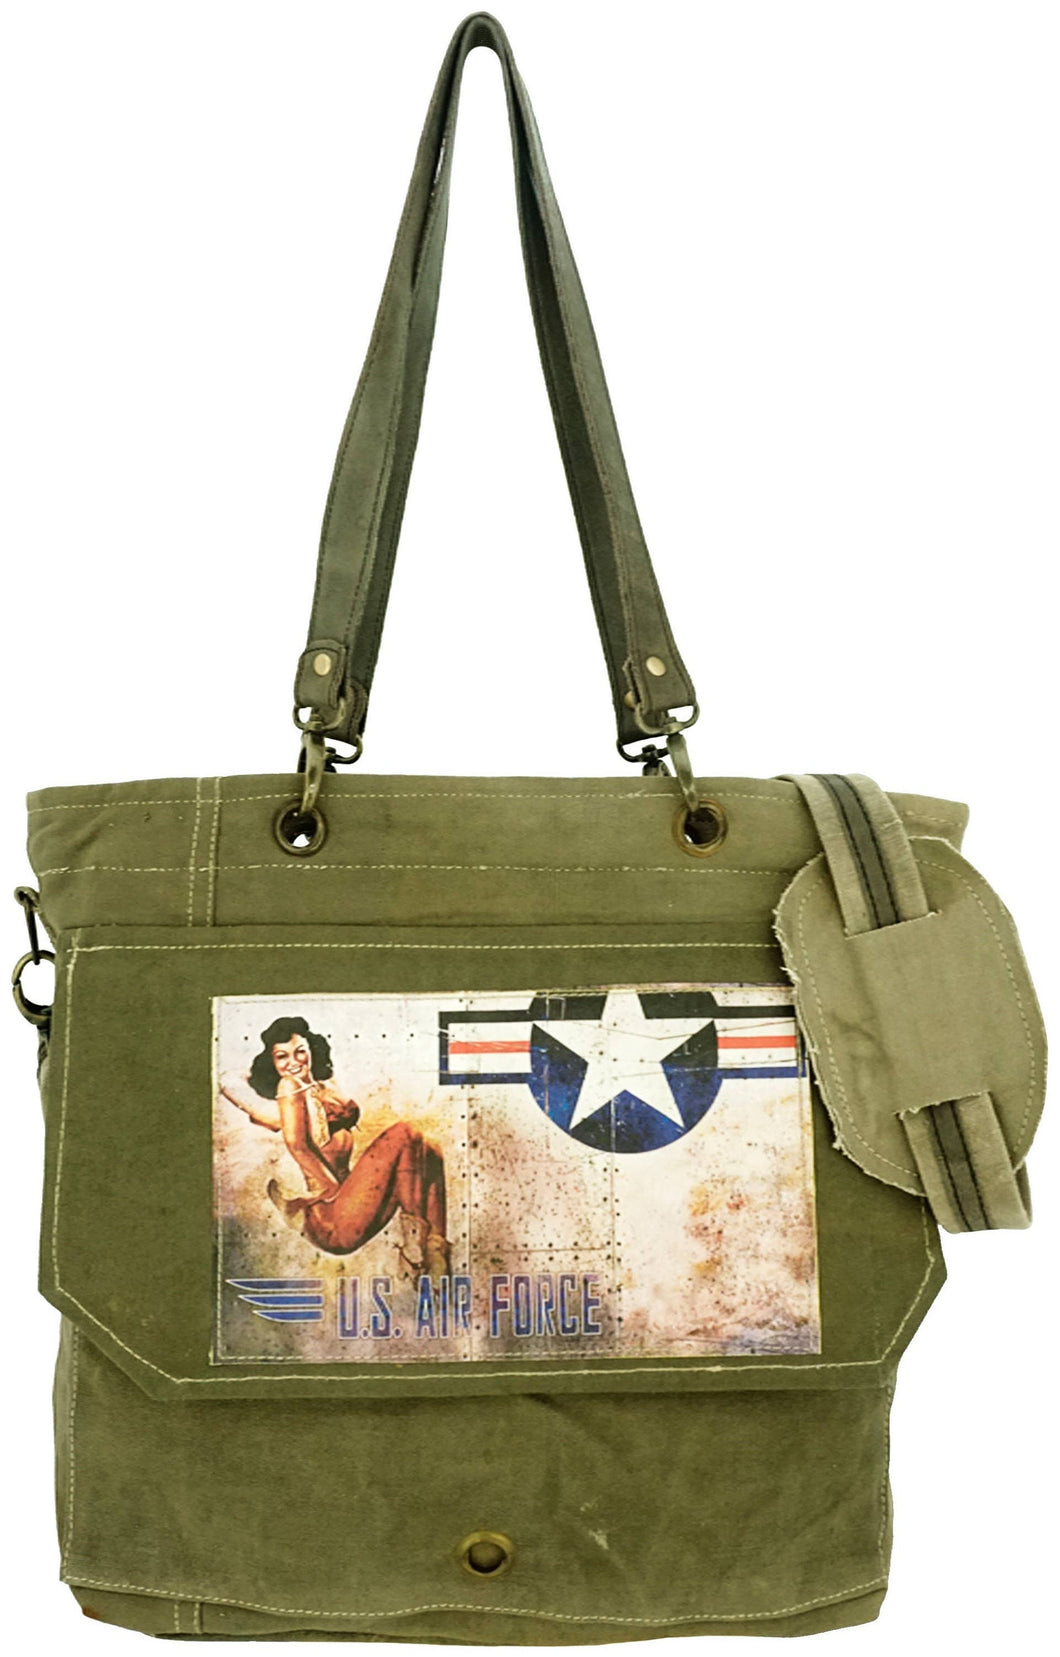 Recycled Military Tent Bag, Recycled Canvas tote bag, Vintage Fabric Bag, Military Veteran Gift, Military Wife Gift, Upcycled Canvas Bag